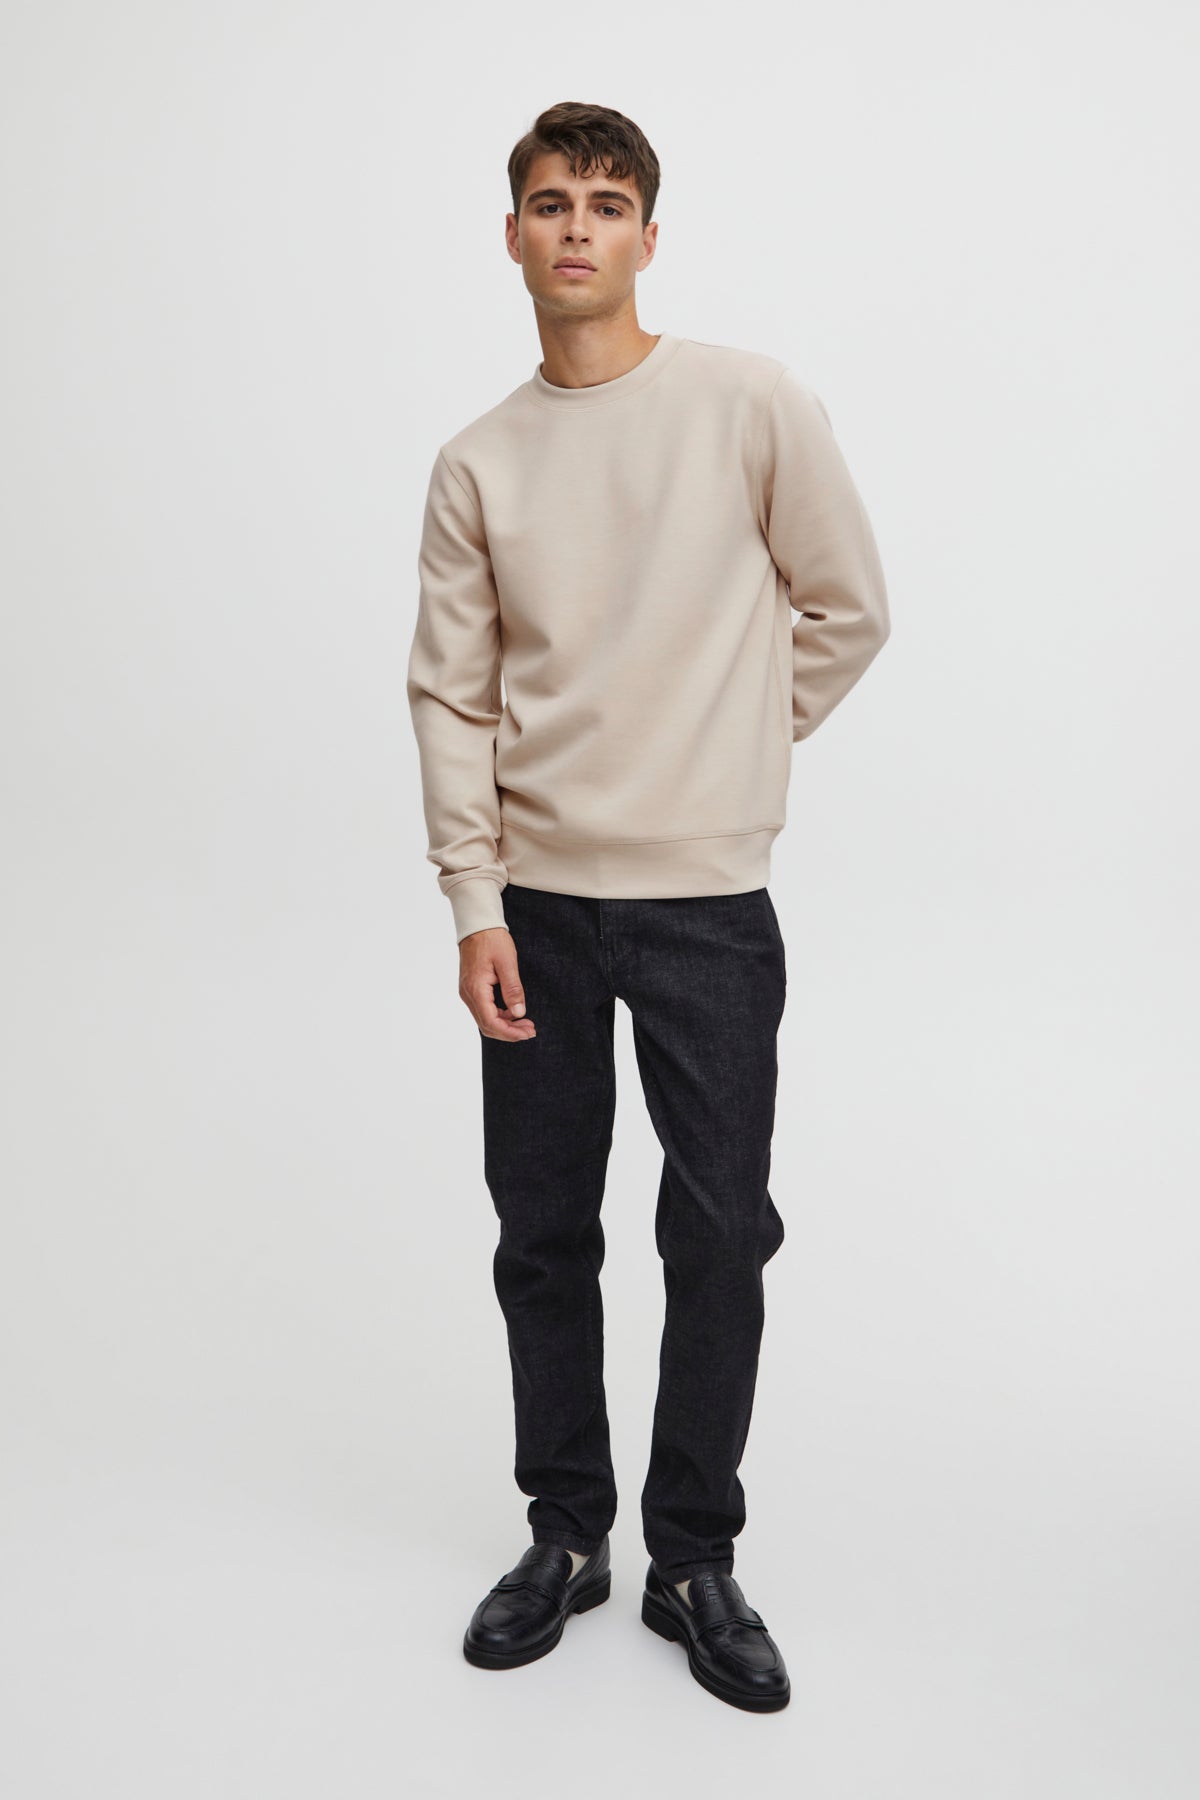 Sebastian Crew Neck Sweat - Chateau Gray - The Sons online